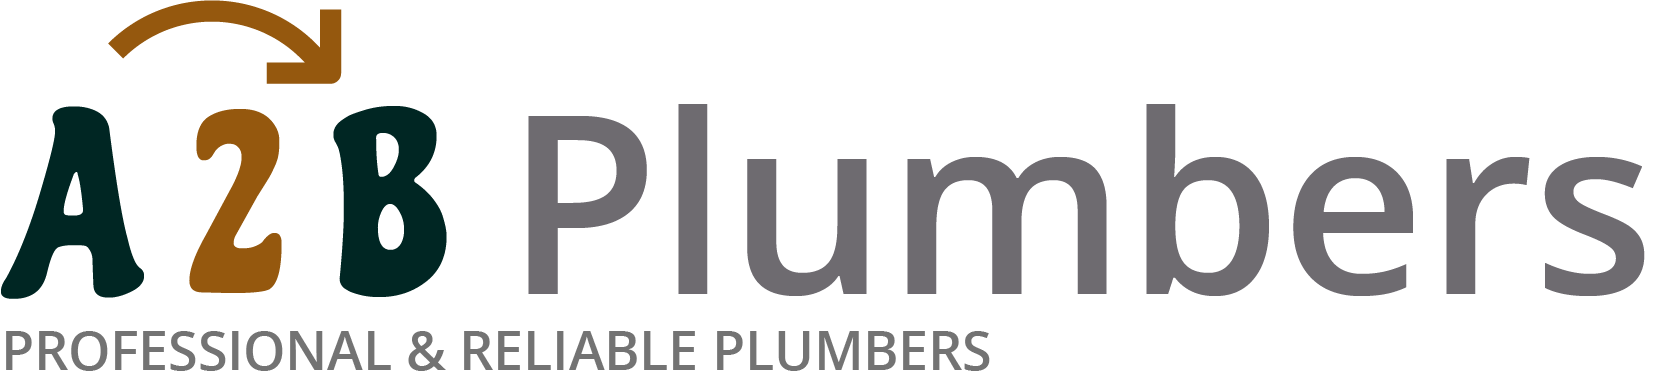 If you need a boiler installed, a radiator repaired or a leaking tap fixed, call us now - we provide services for properties in Cubitt Town and the local area.